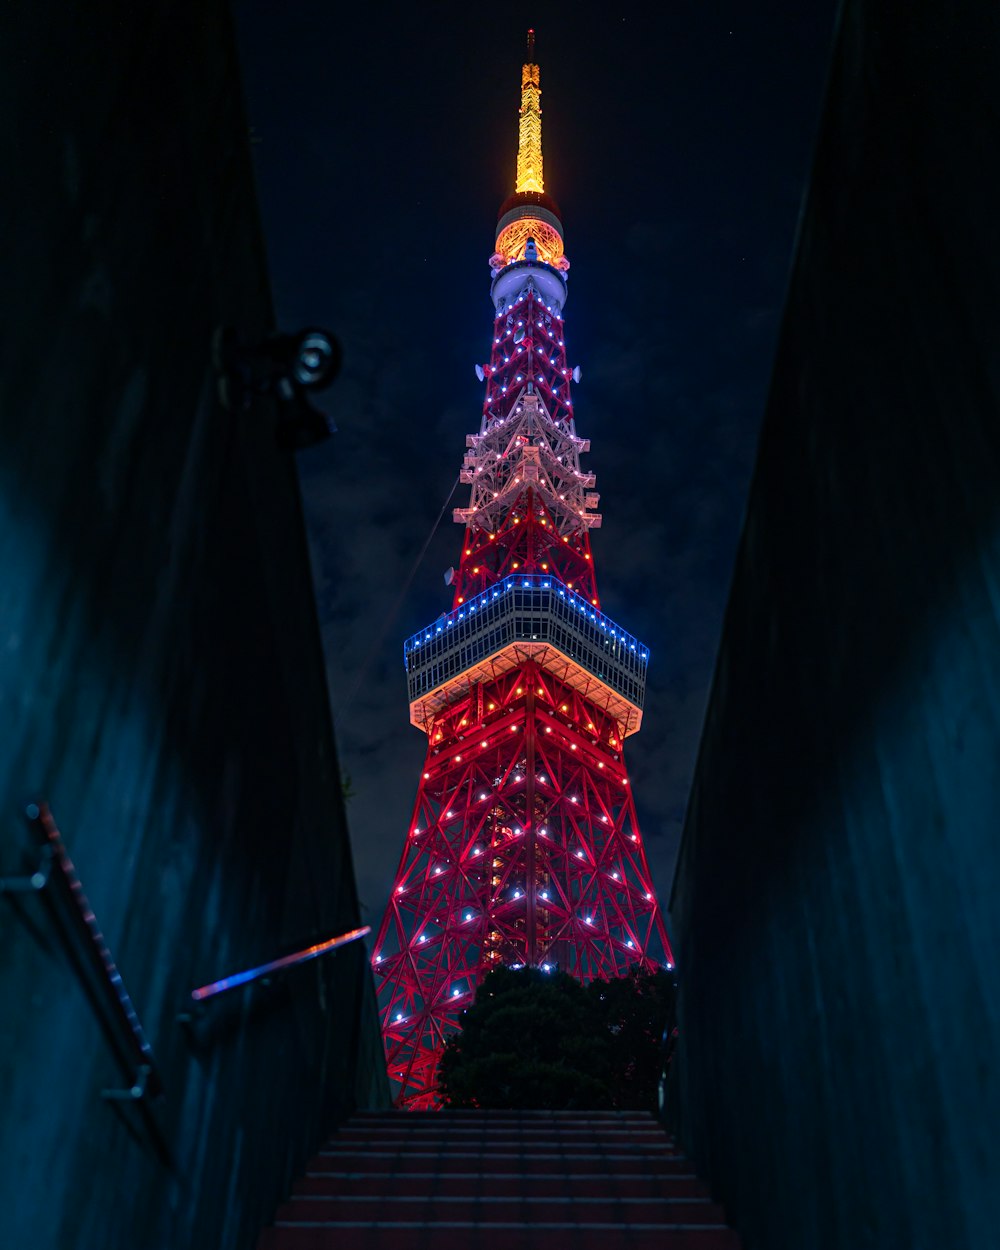 a tall tower lit up at night